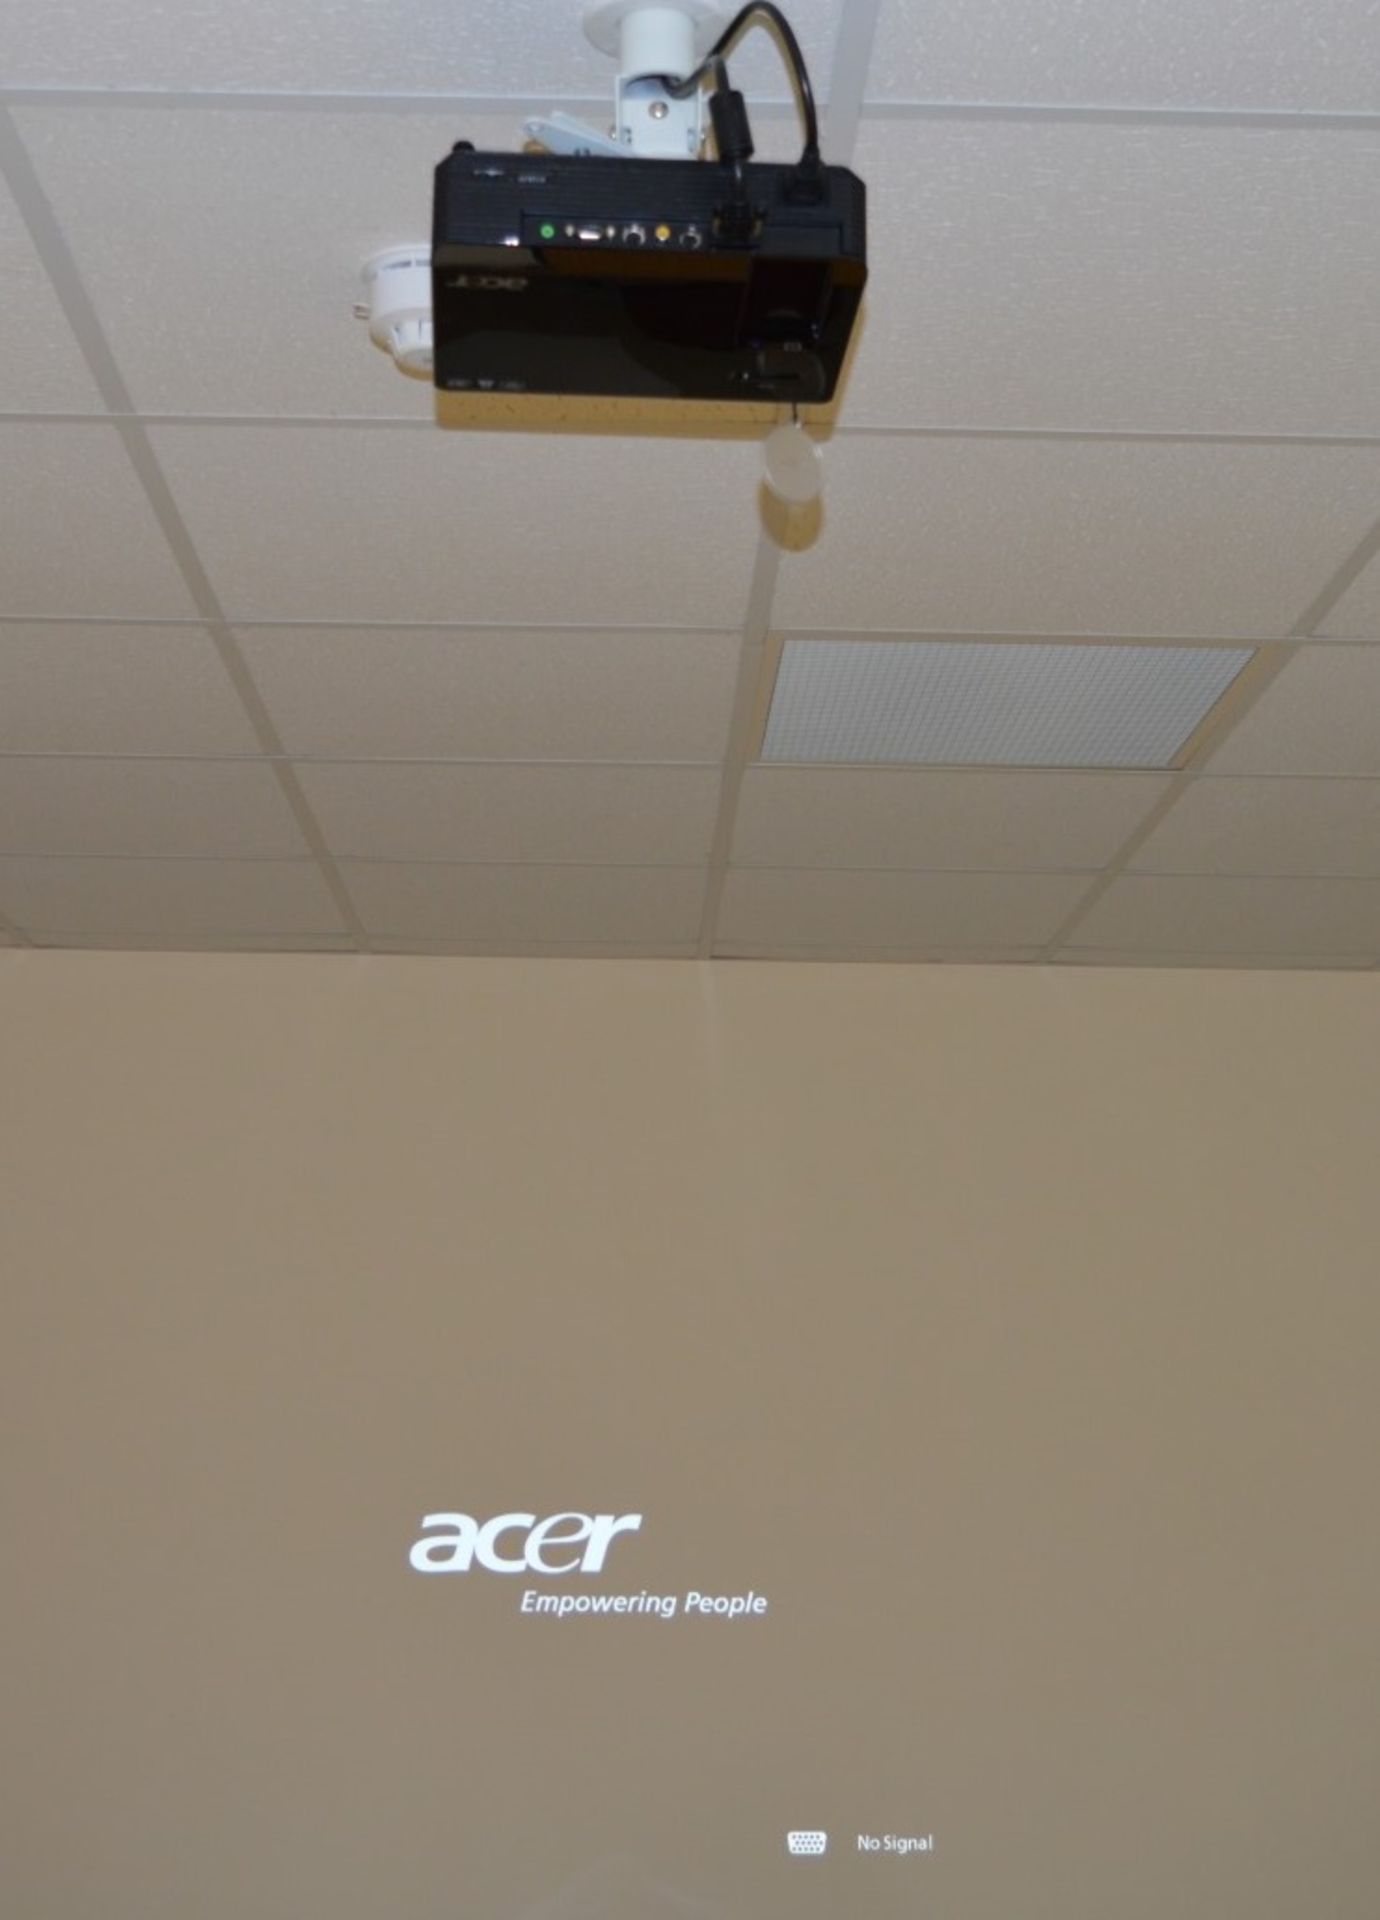 1 x Acer X1261 DLP Projector With Ceiling Bracket and Remote Control - CL300 - Ref S110 - - Image 4 of 10